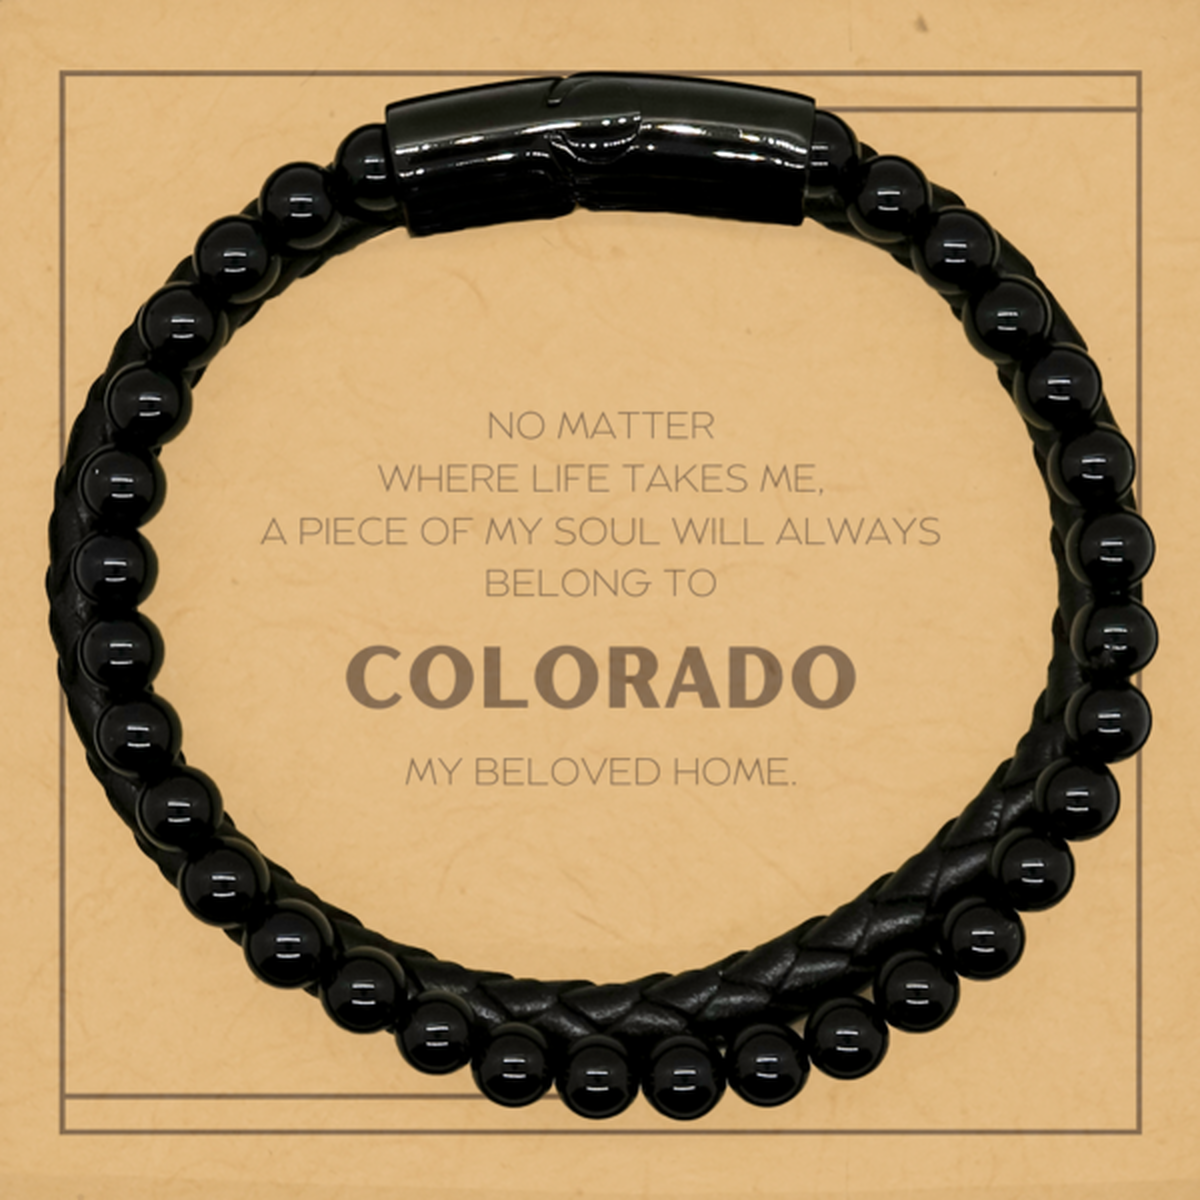 Love Colorado State Gifts, My soul will always belong to Colorado, Proud Stone Leather Bracelets, Birthday Unique Gifts For Colorado Men, Women, Friends